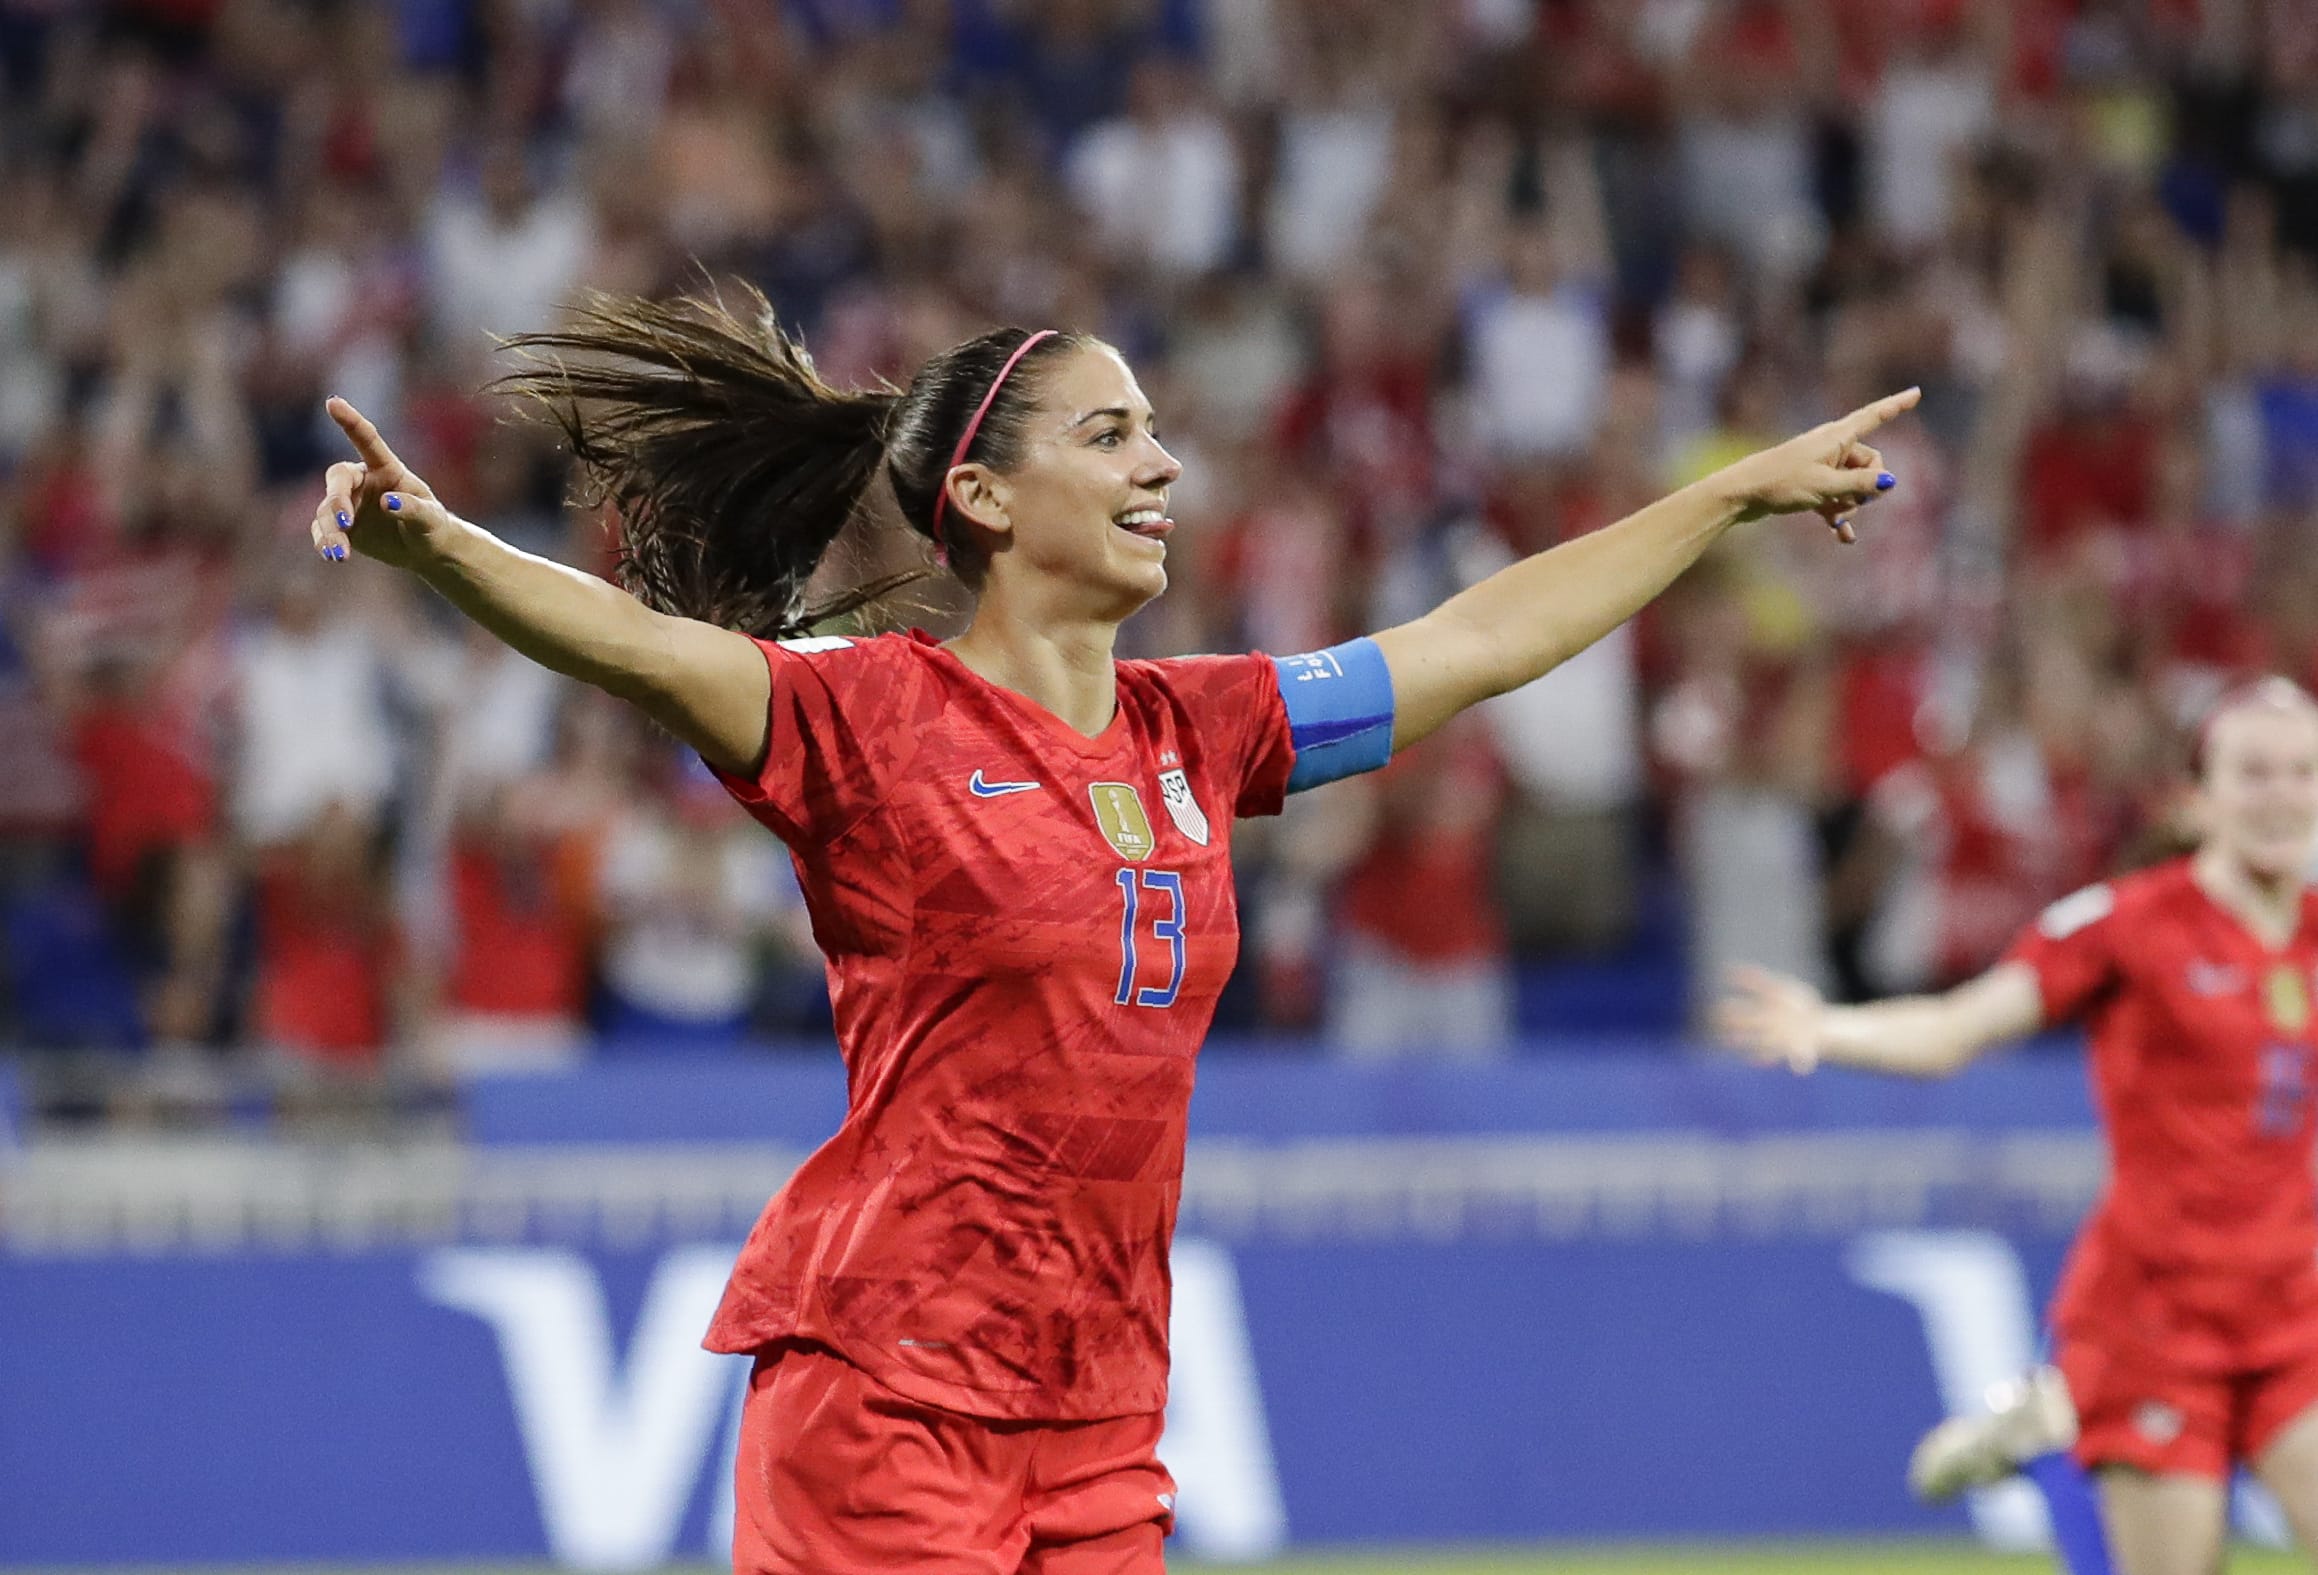 United States' Alex Morgan celebrates after scoring her side's second goal during the Women's World Cup semifinal soccer match between England and the United States, at the Stade de Lyon, outside Lyon, France, Tuesday, July 2, 2019.